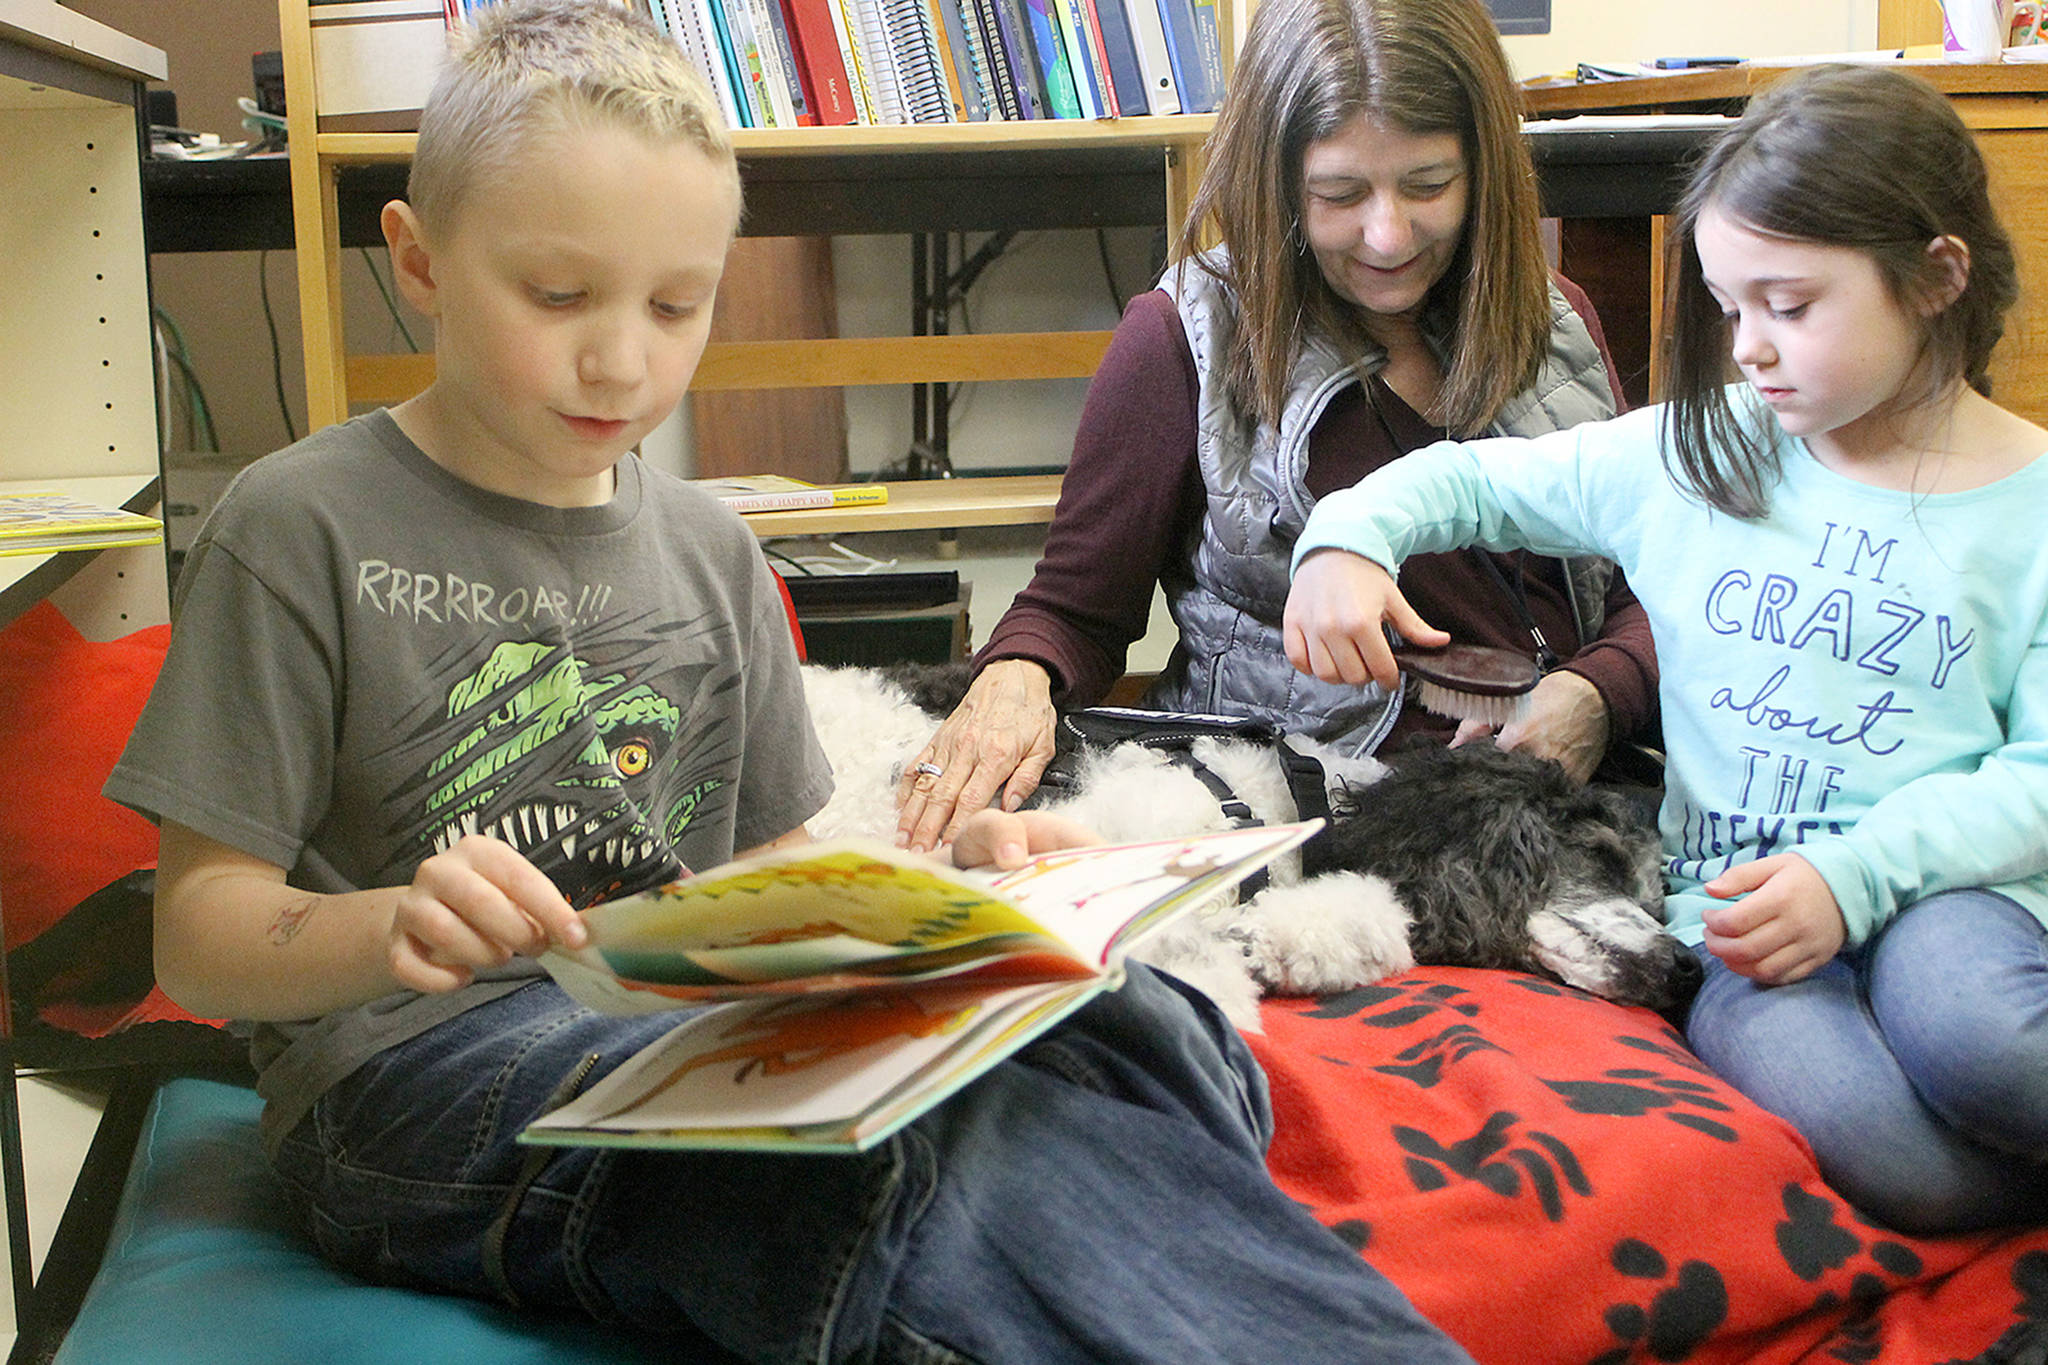 Therapy dog helps South Whidbey Elementary School students read, relax